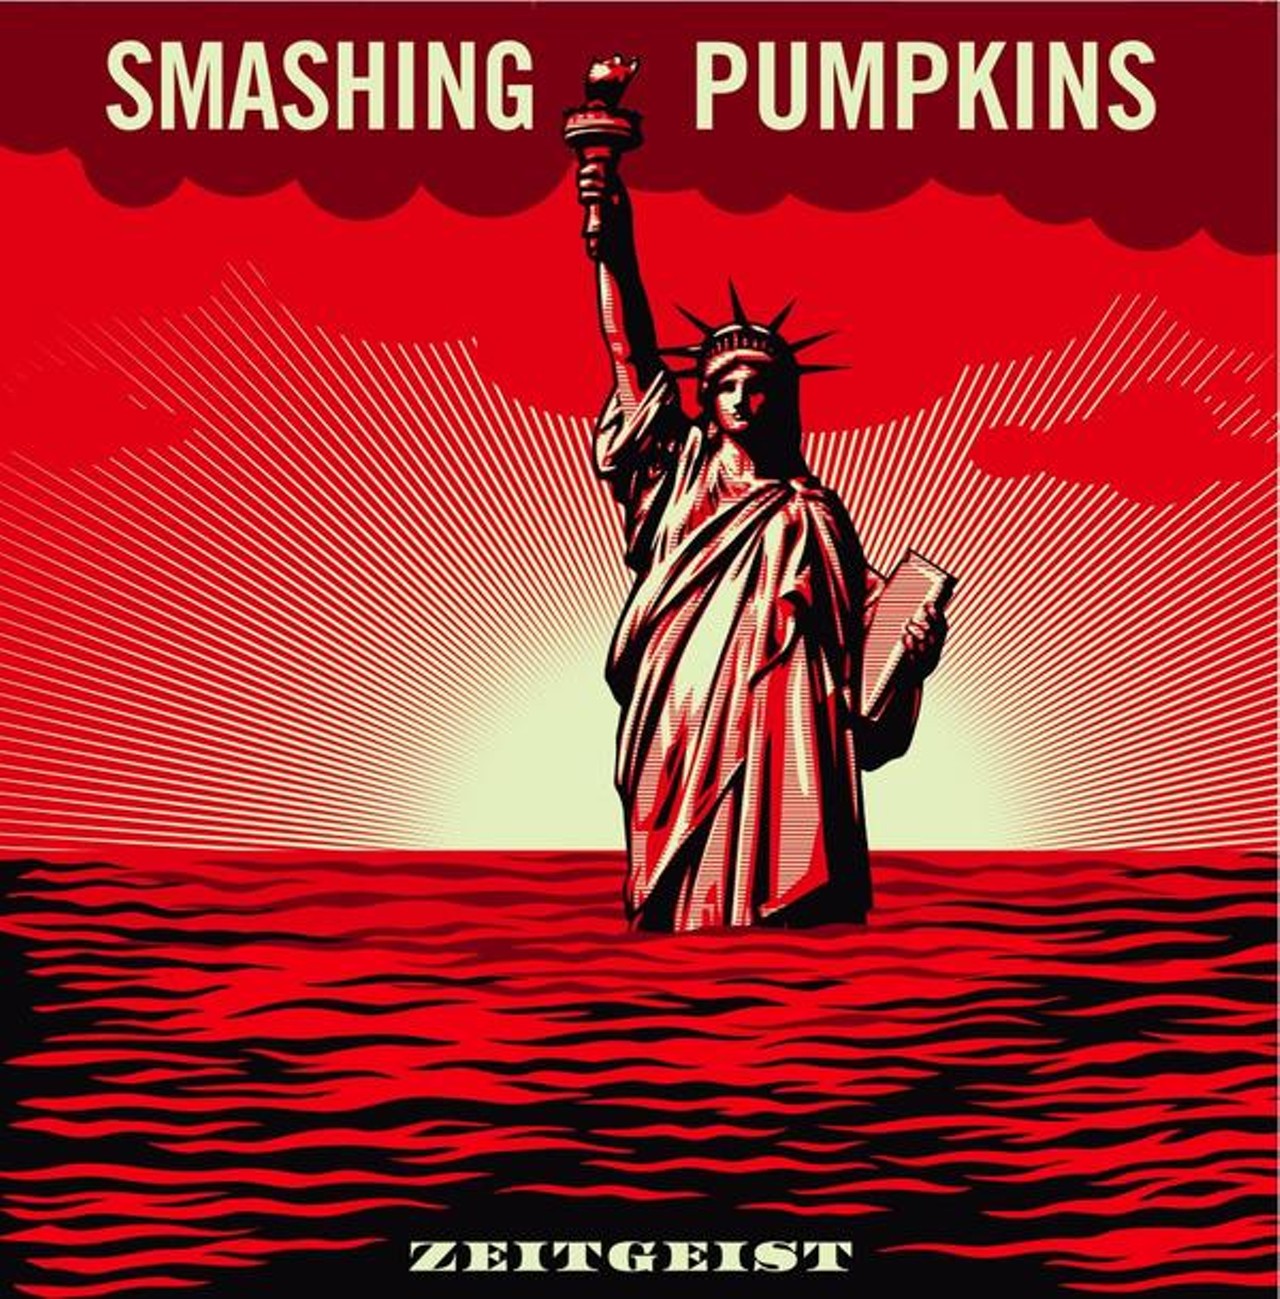 4. Smashing Pumpkins' "Zeitgeist" is plain by comparison but striking with the Statue sinking into a red sea.